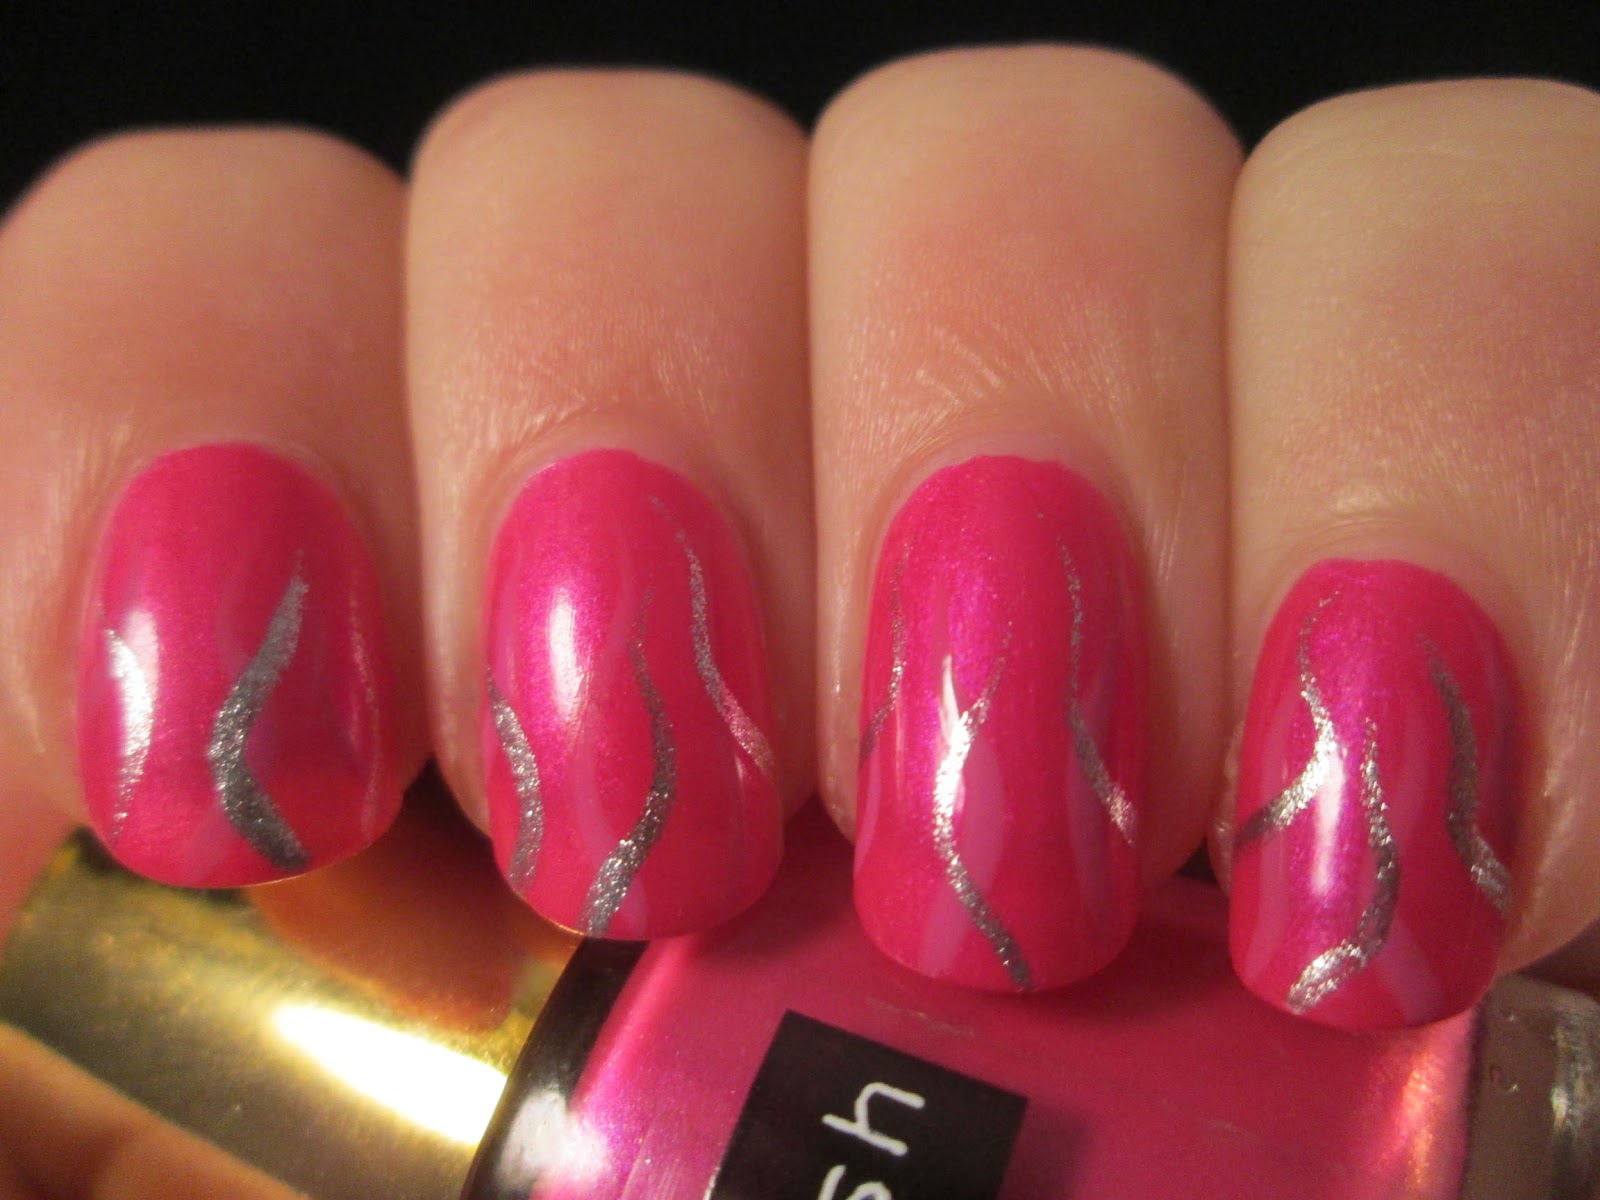 PiggieLuv: Silver on pink squiggly nail art